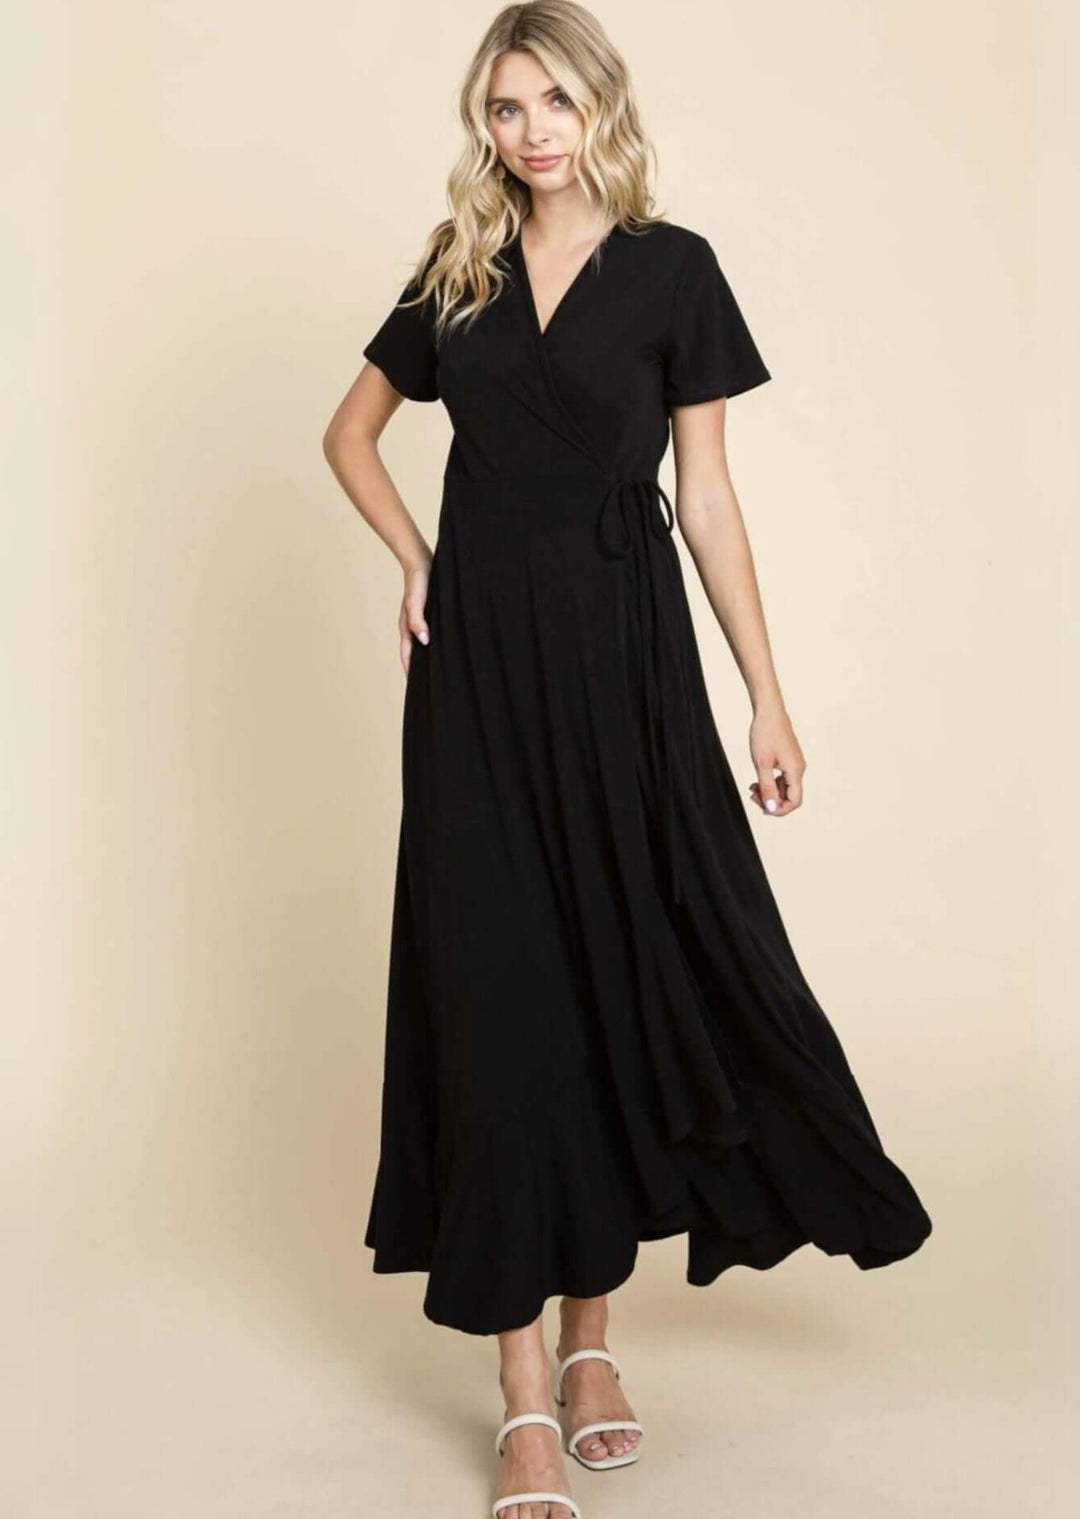 Made in USA Ladies Super Soft Black V-Neck Wrap Style Maxi Dress With Tie Side  | Classy Cozy Cool Women's Made in America Boutique